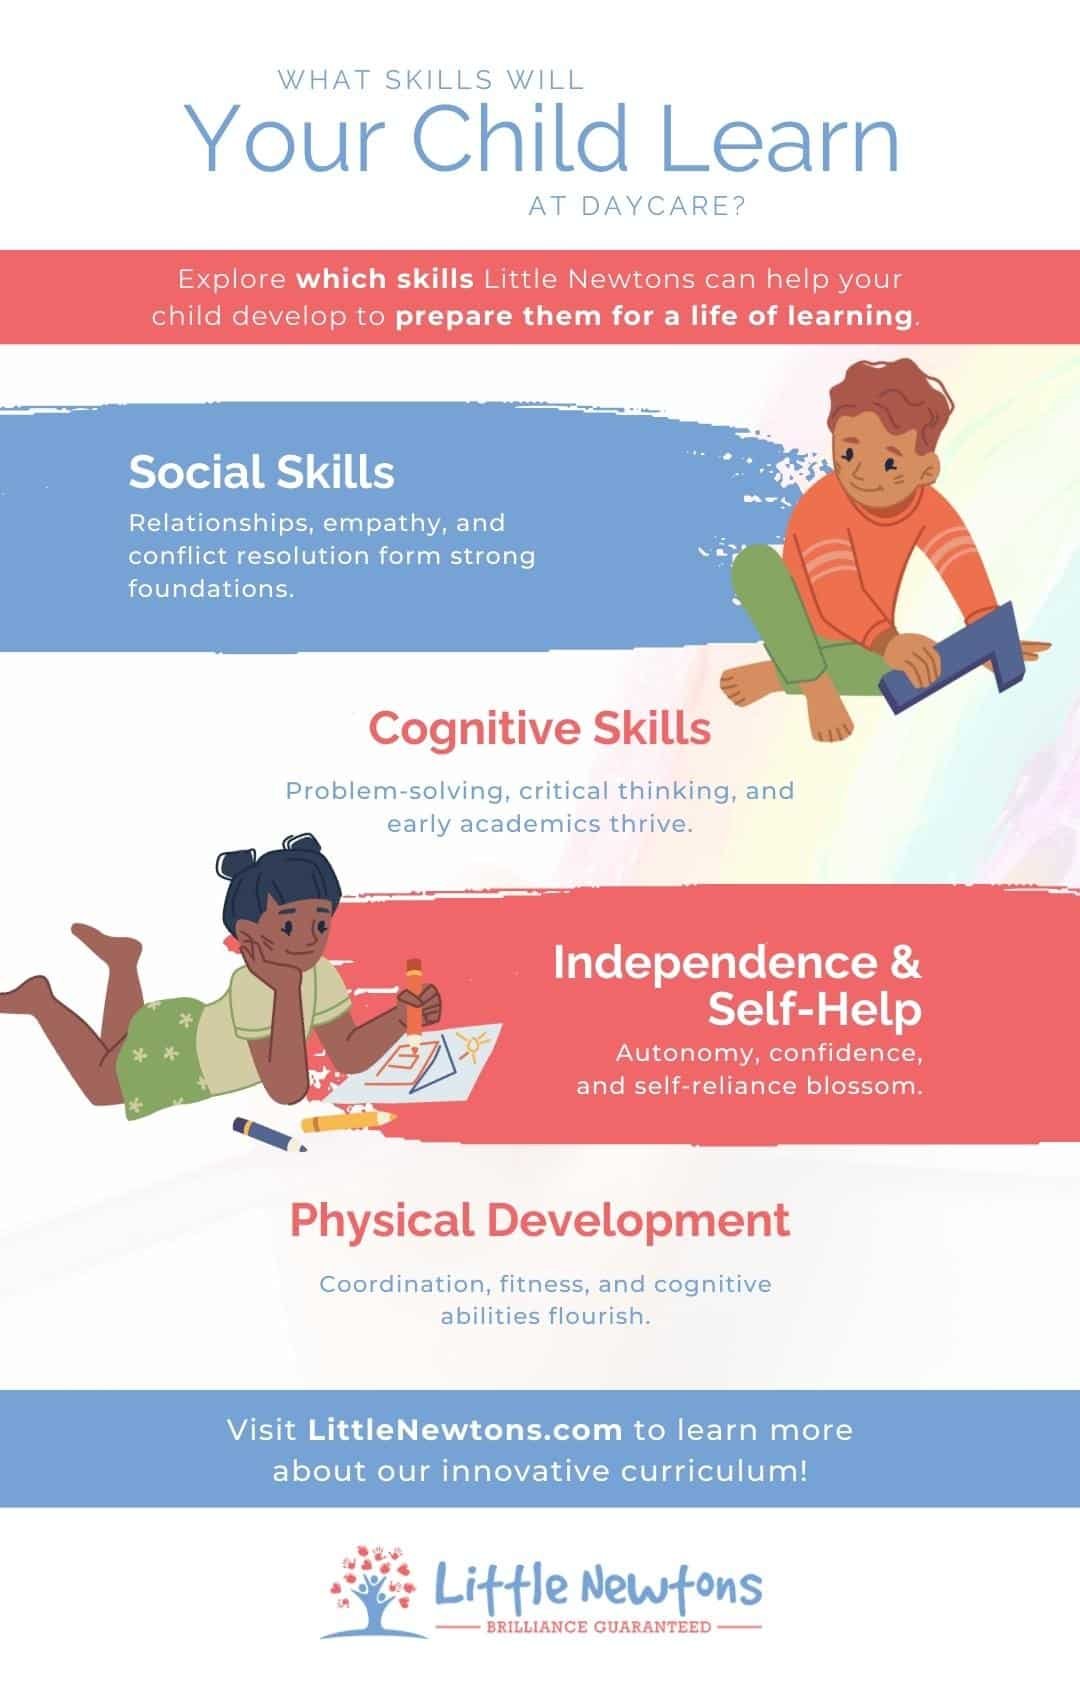  Infographic - What Skills Will Your Child Learn at Daycare?